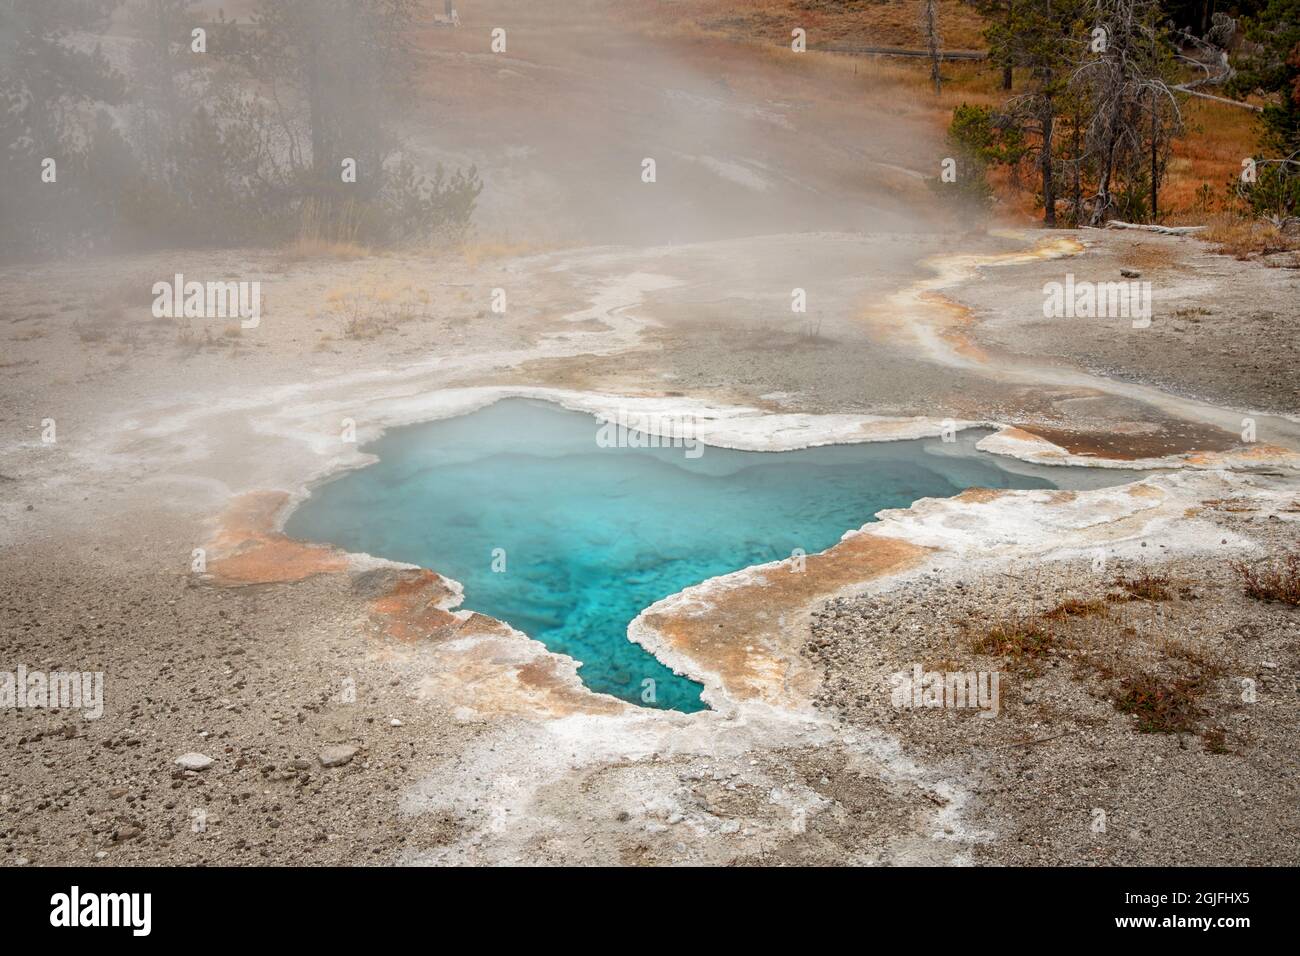 Blue star Spring, Upper Geyser Basin, parc national de Yellowstone, Wyoming Banque D'Images